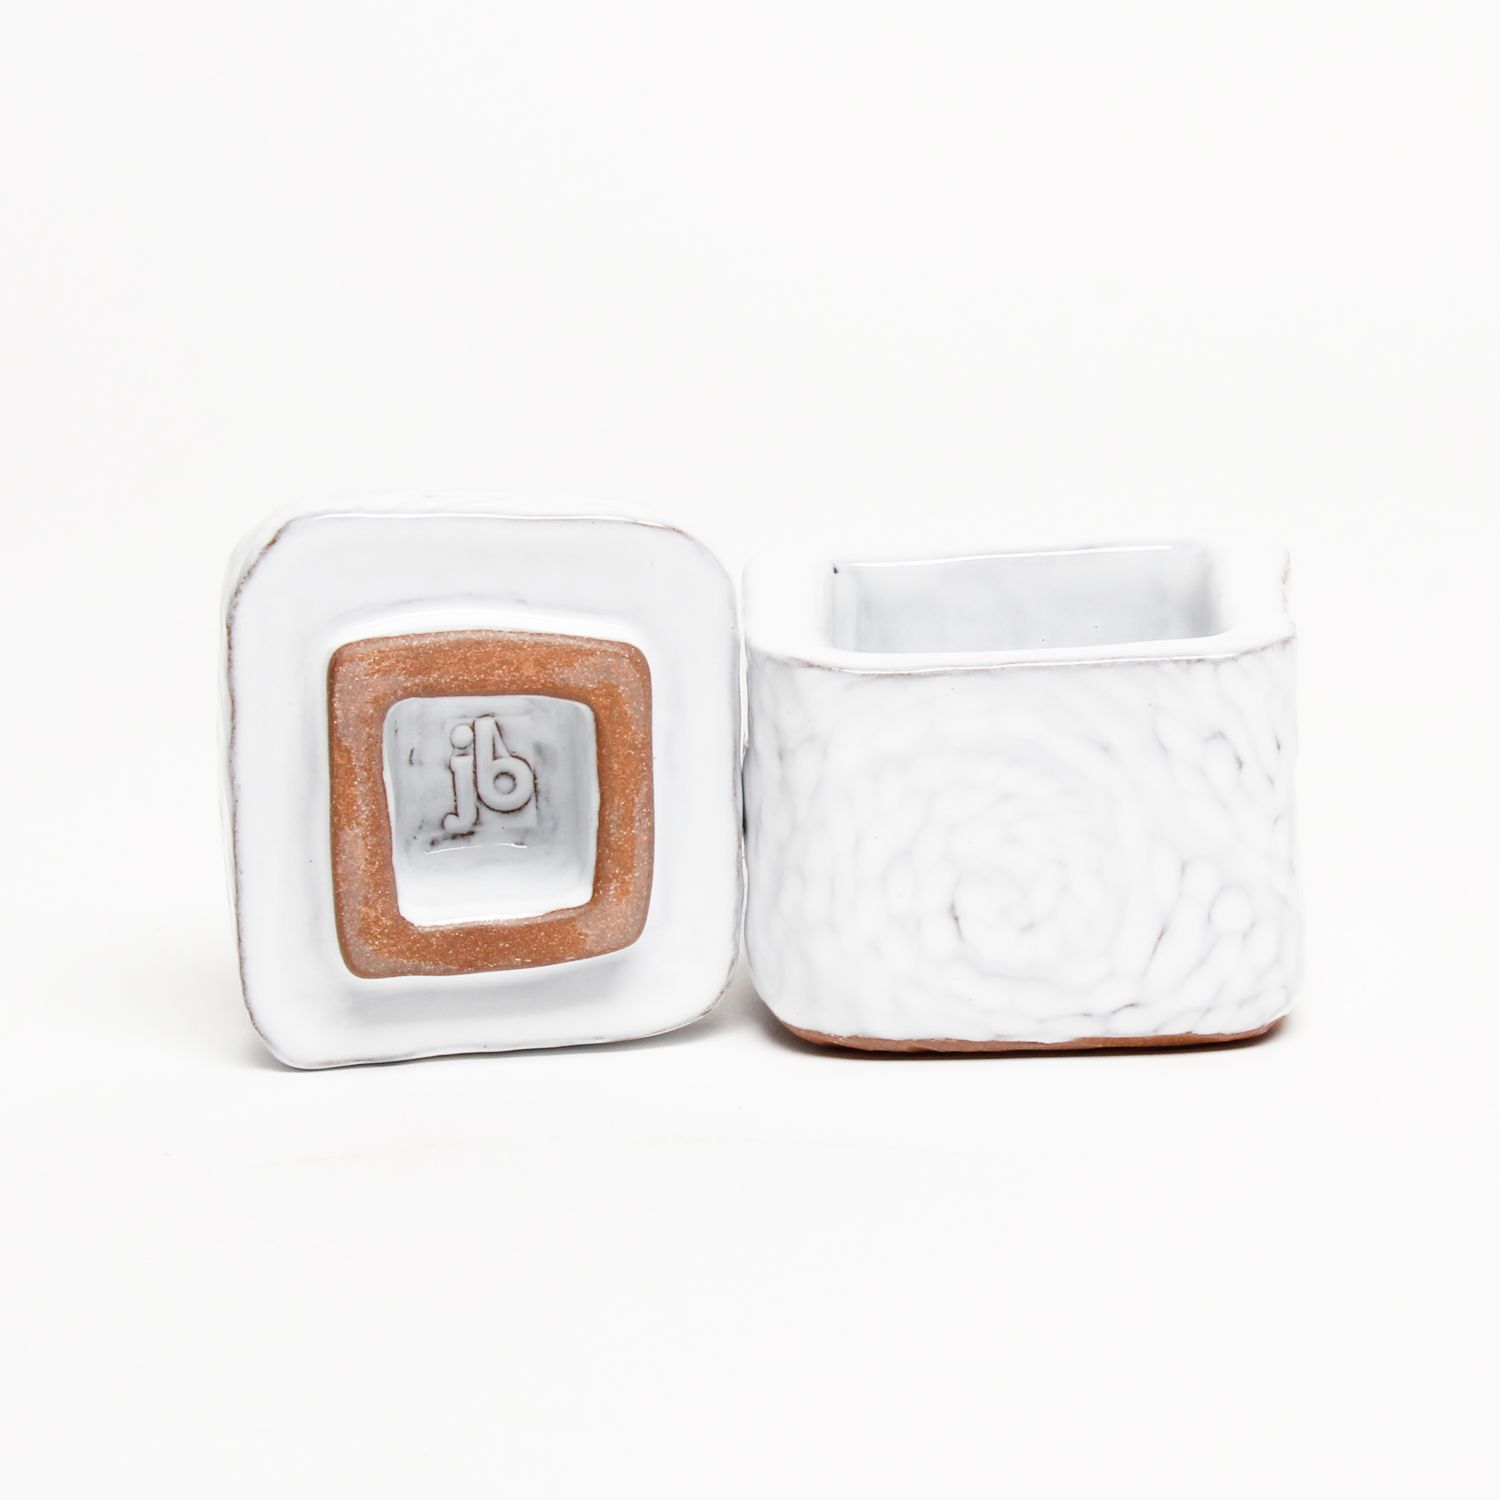 Jacquie Blondin: Cube Container Product Image 2 of 3